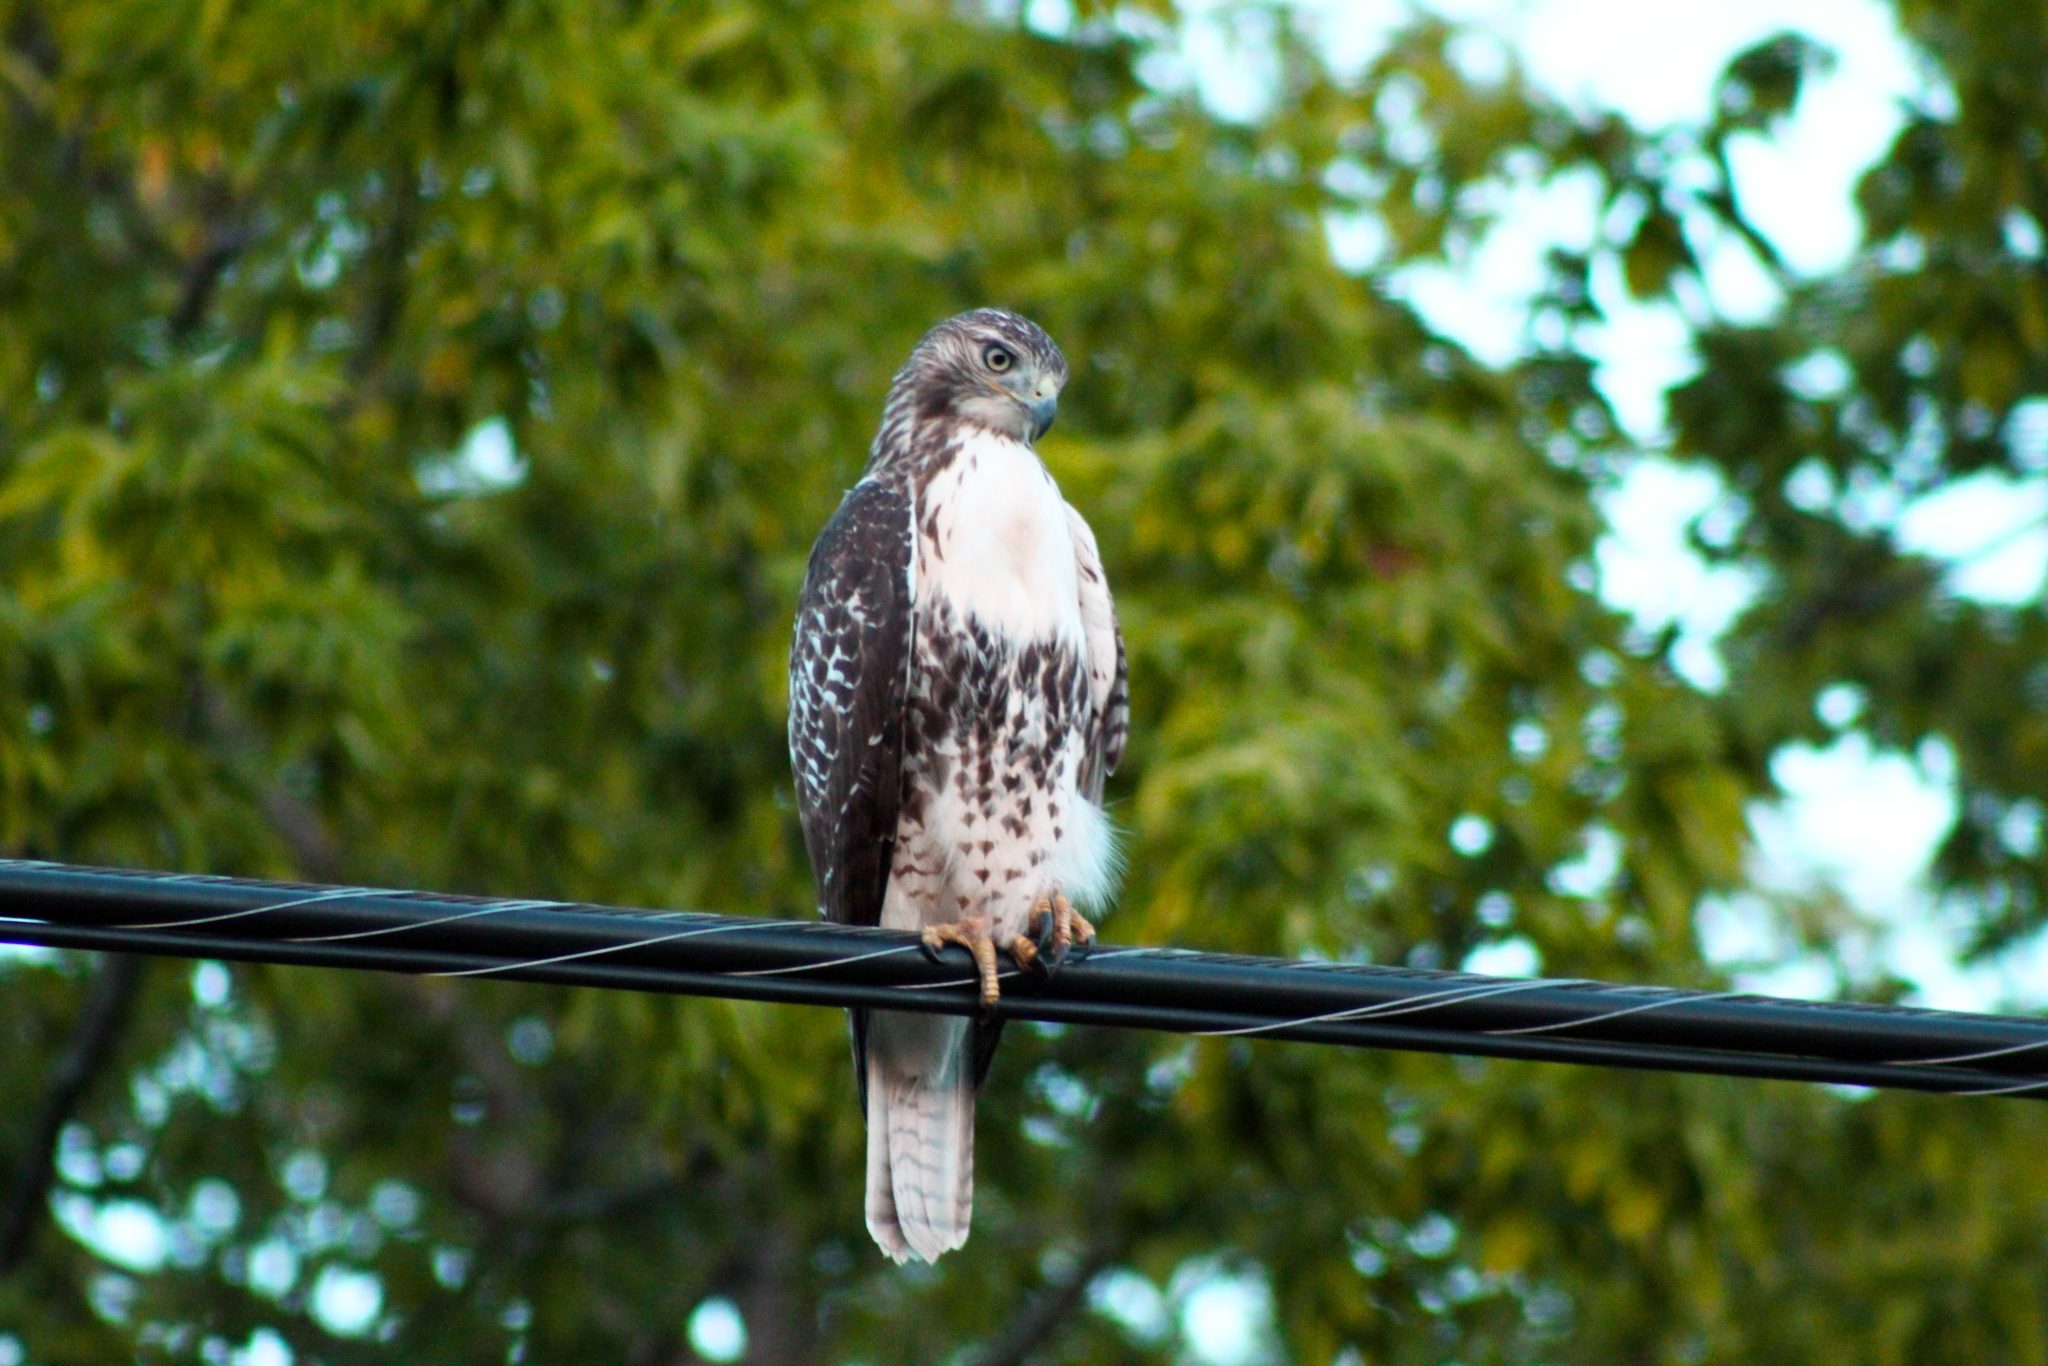 A red-tailed hawk sits on a wire outside of Rochester, New York. Tags: hawk, bird, rochester, New York, USA, raptor